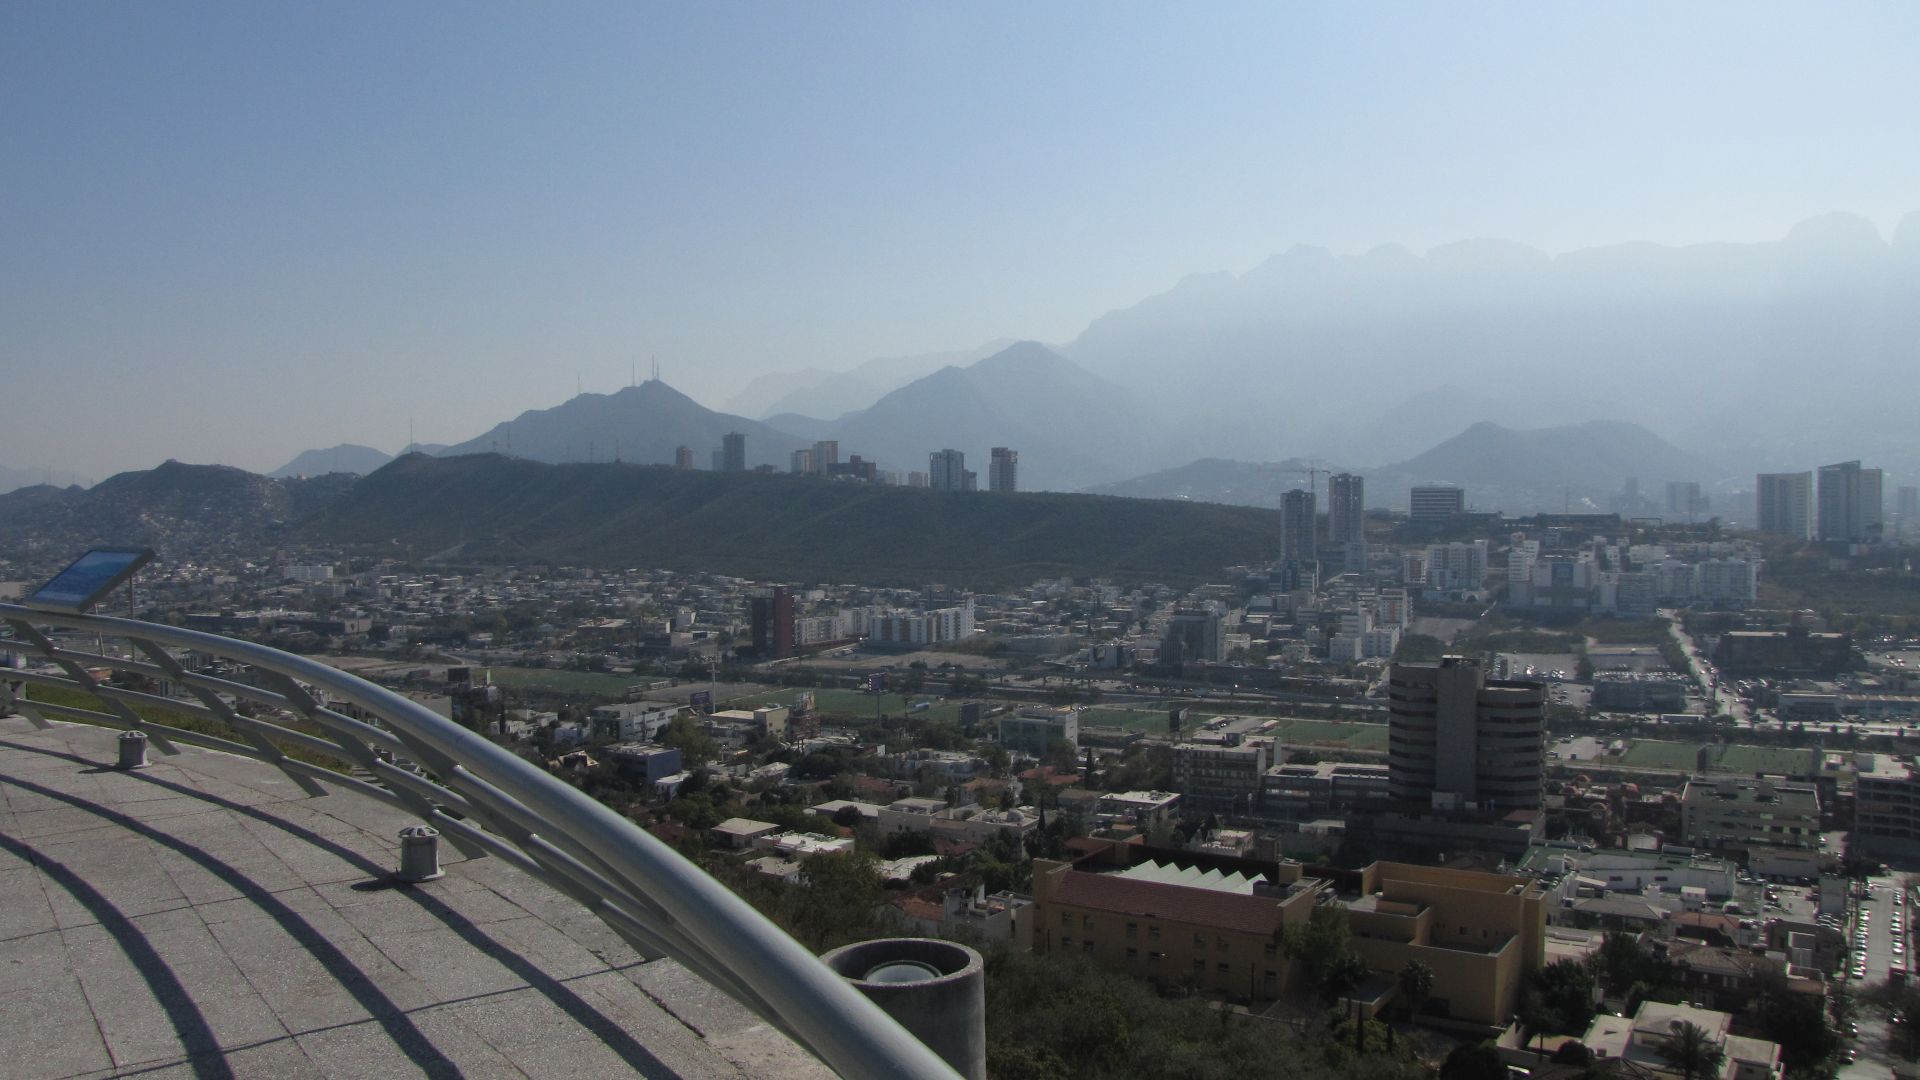 Monterrey, NL, Mexico - 3.5 million people and growing ...